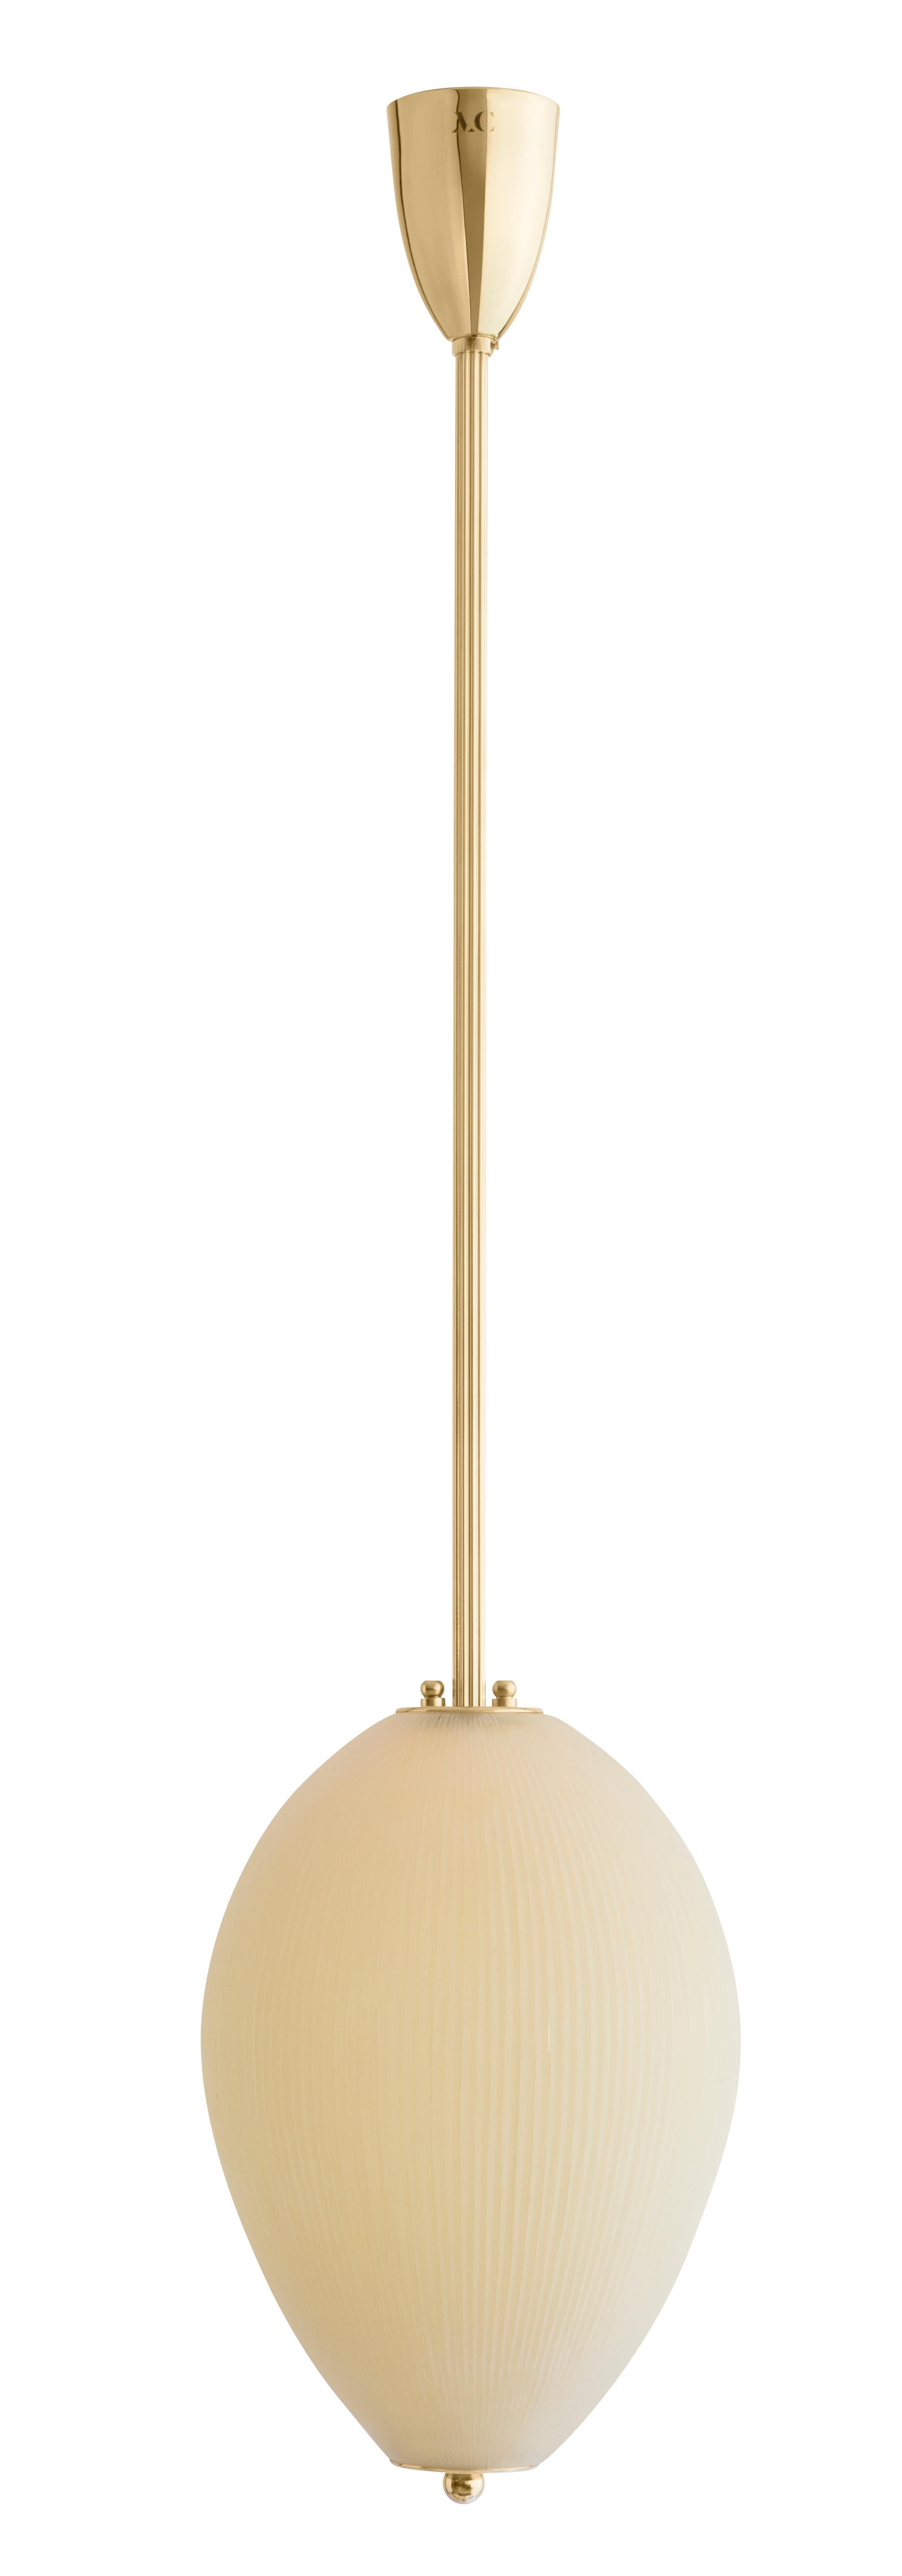 Pendant China 10 by Magic Circus Editions
Dimensions: H 90 x W 32 x D 32 cm, also available in H 110, 130, 150, 175, 190 cm
Materials: Brass, mouth blown glass sculpted with a diamond saw
Colour: mustard yellow

Available finishes: Brass,